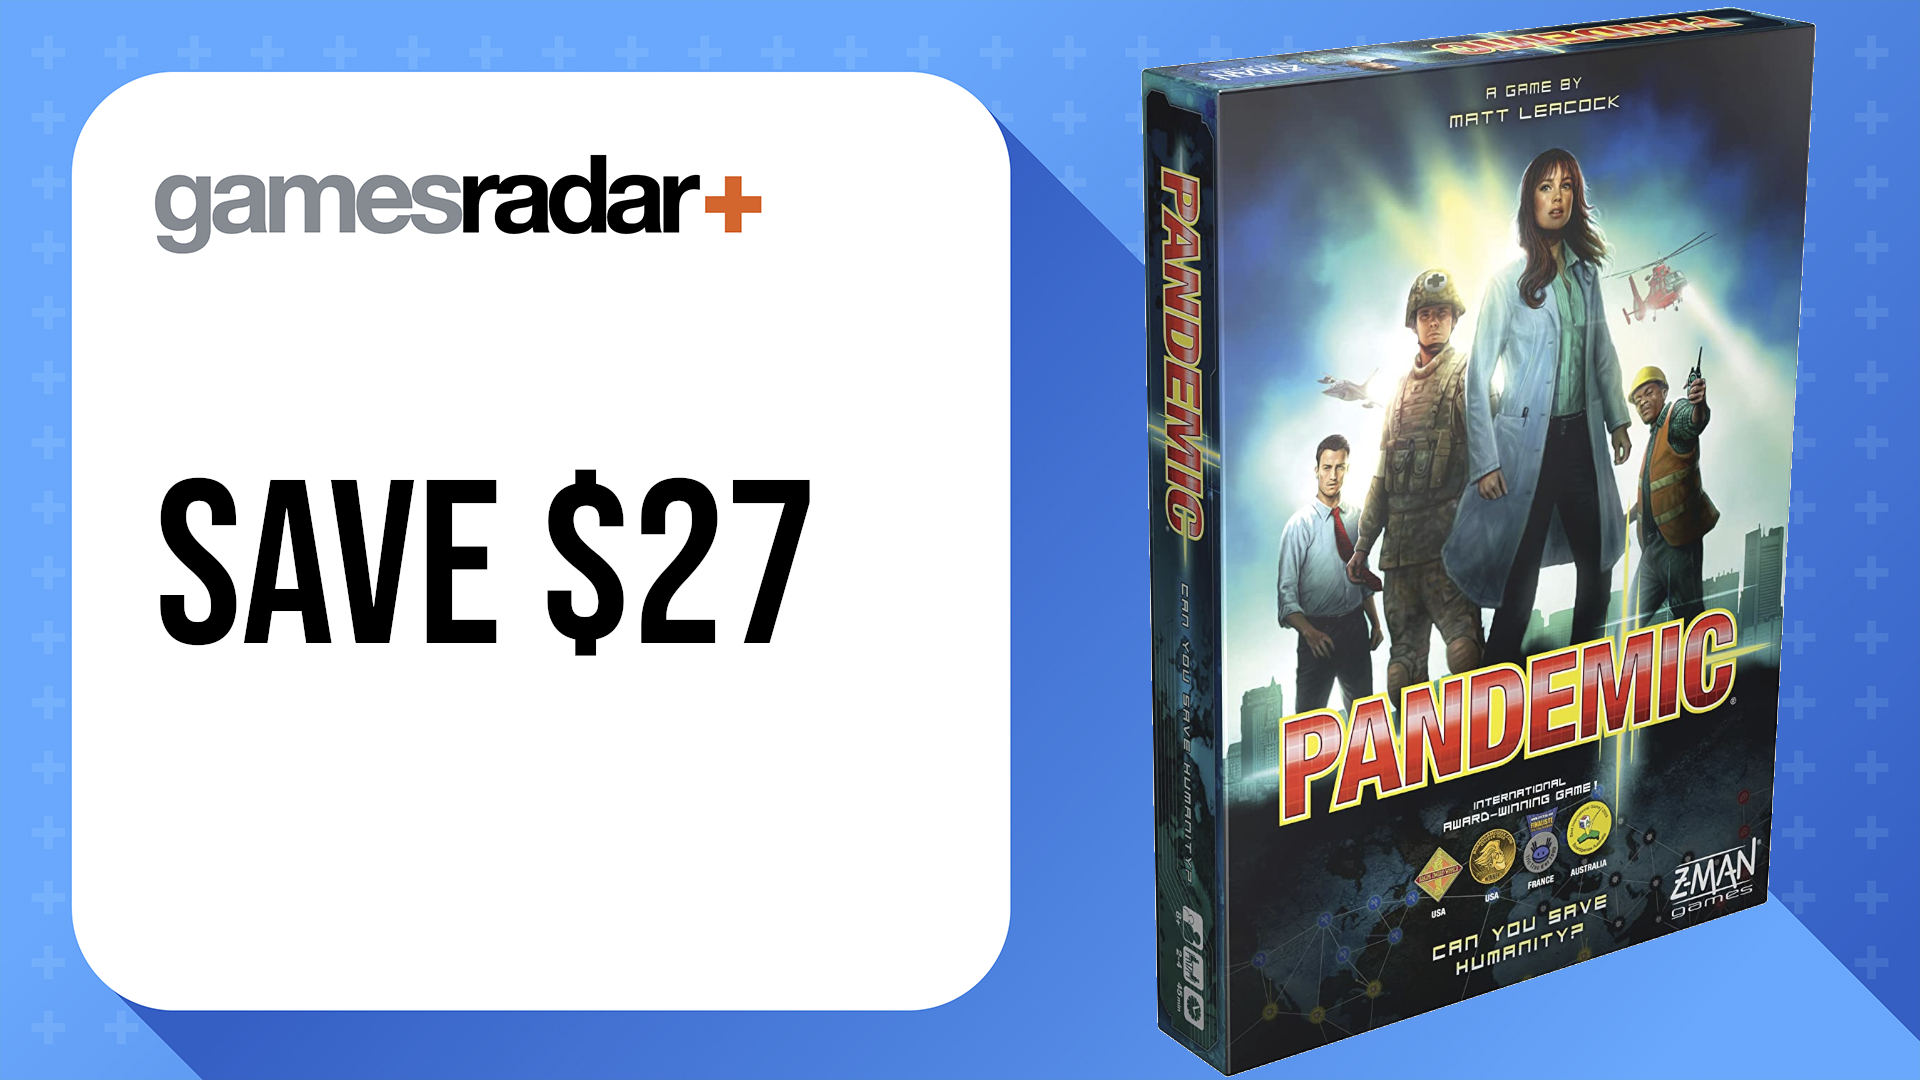 Black Friday board game deals with Pandemic